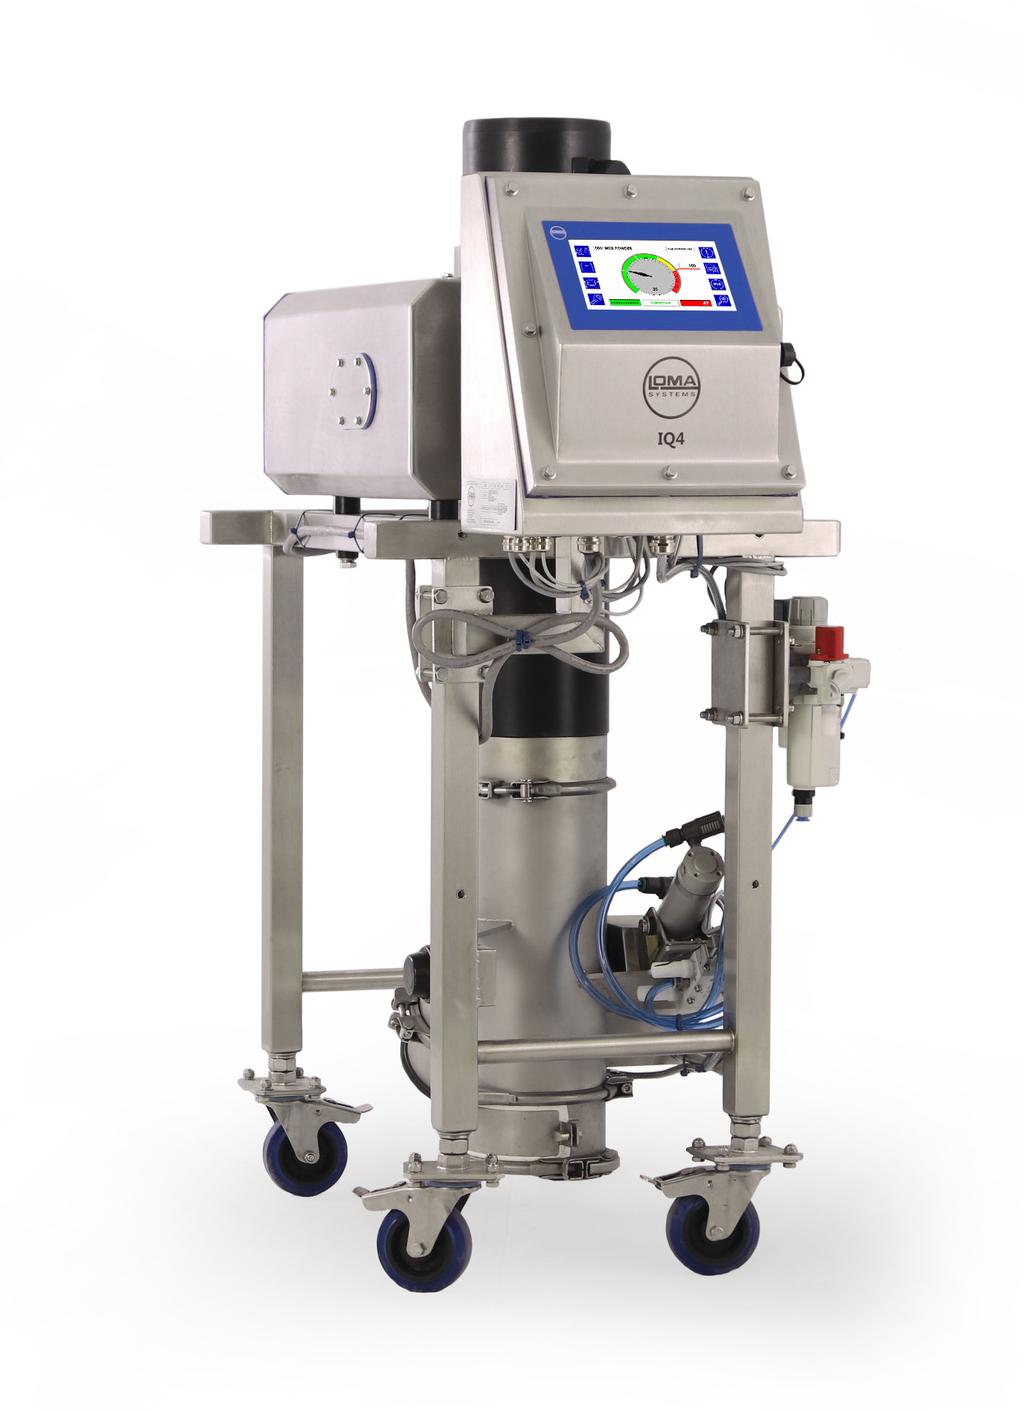 Technology Sealed to IP66 for wash down applications Quick release sealed valve or cowbell reject mechanisms available 7 Color Touchscreen The new color touchscreen provides access to all critical